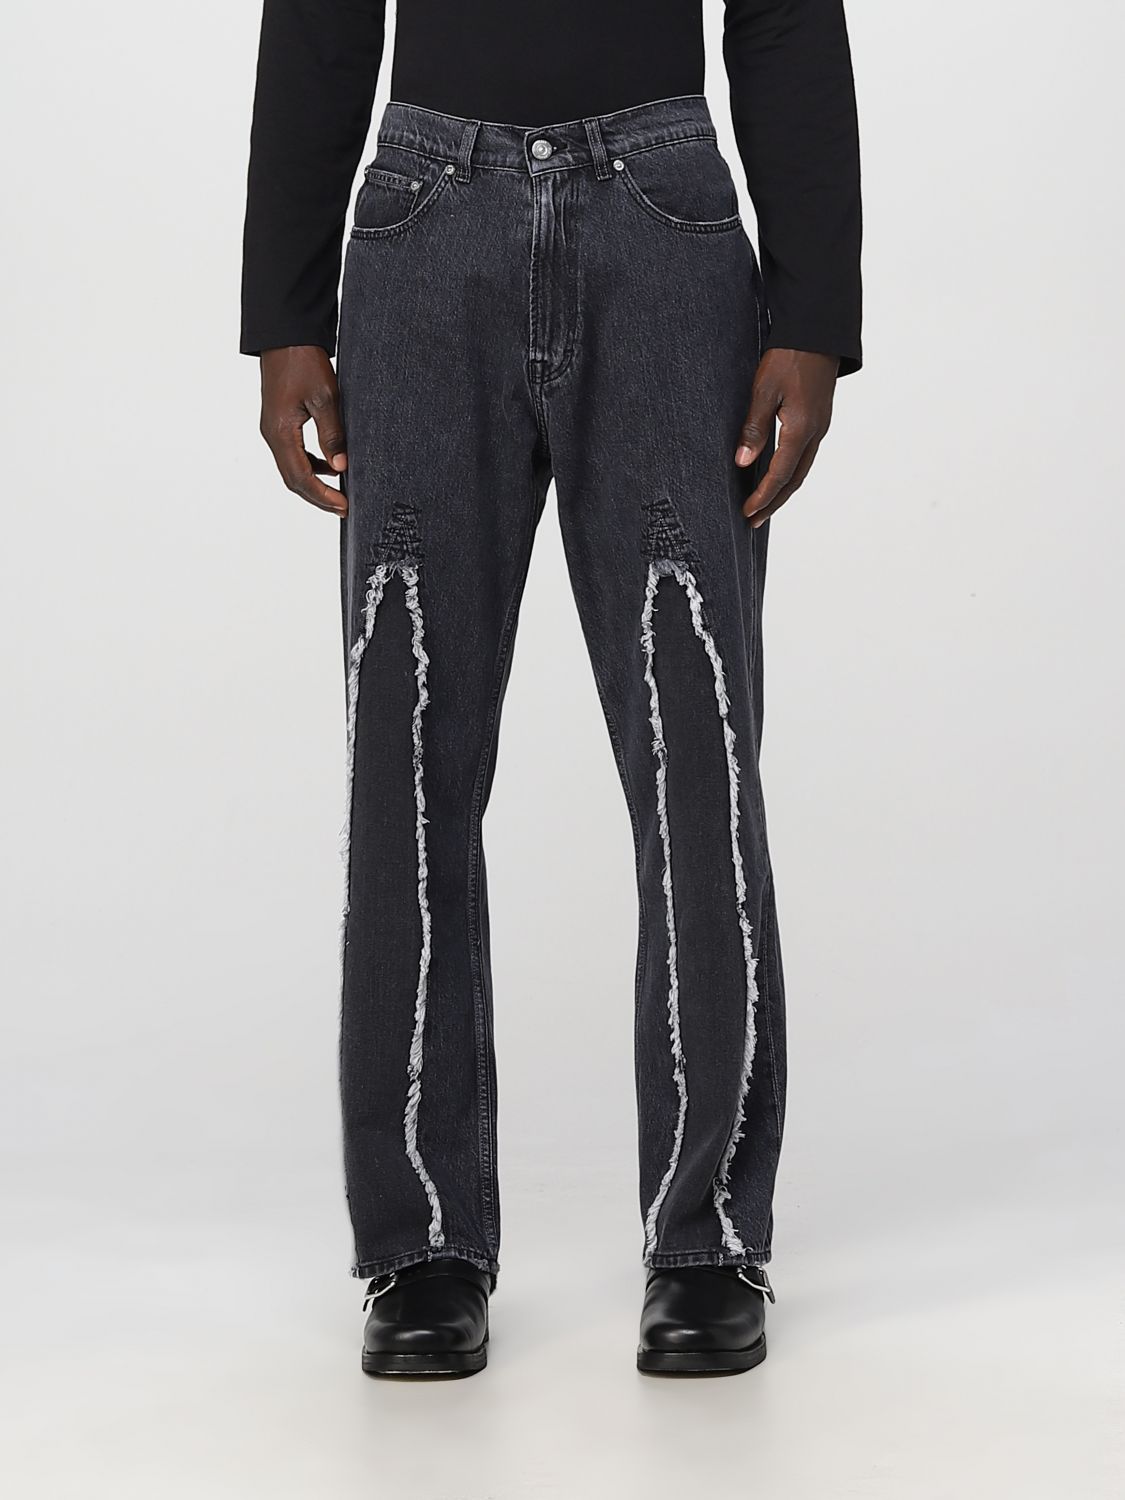 Jeans Our Legacy: Jeans Our Legacy homme noir 1